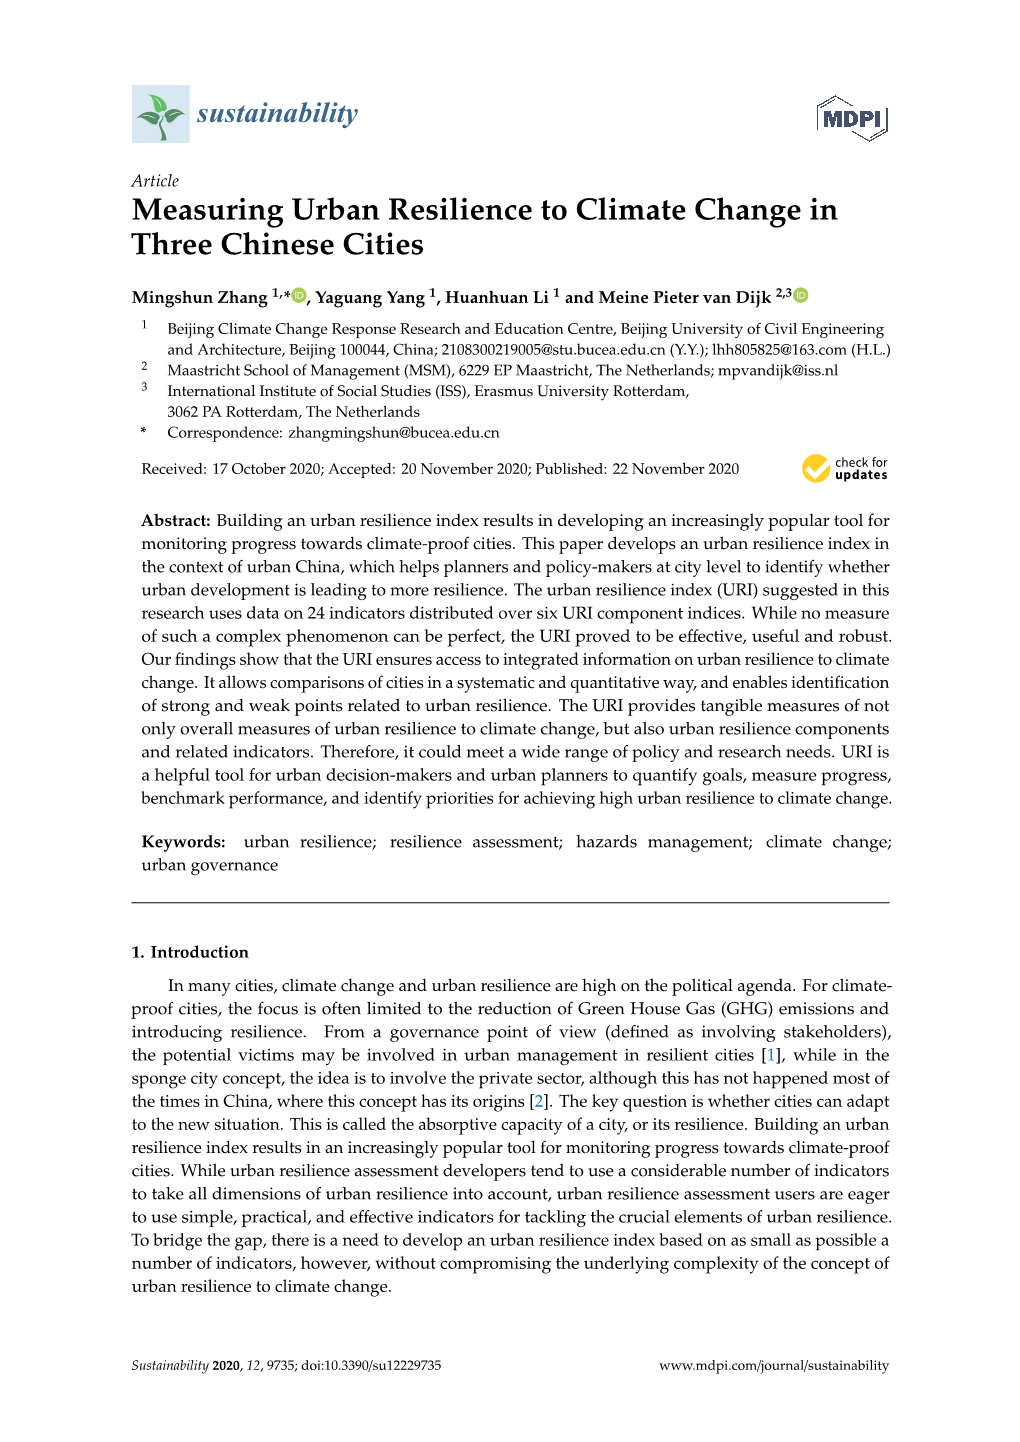 Measuring Urban Resilience to Climate Change in Three Chinese Cities